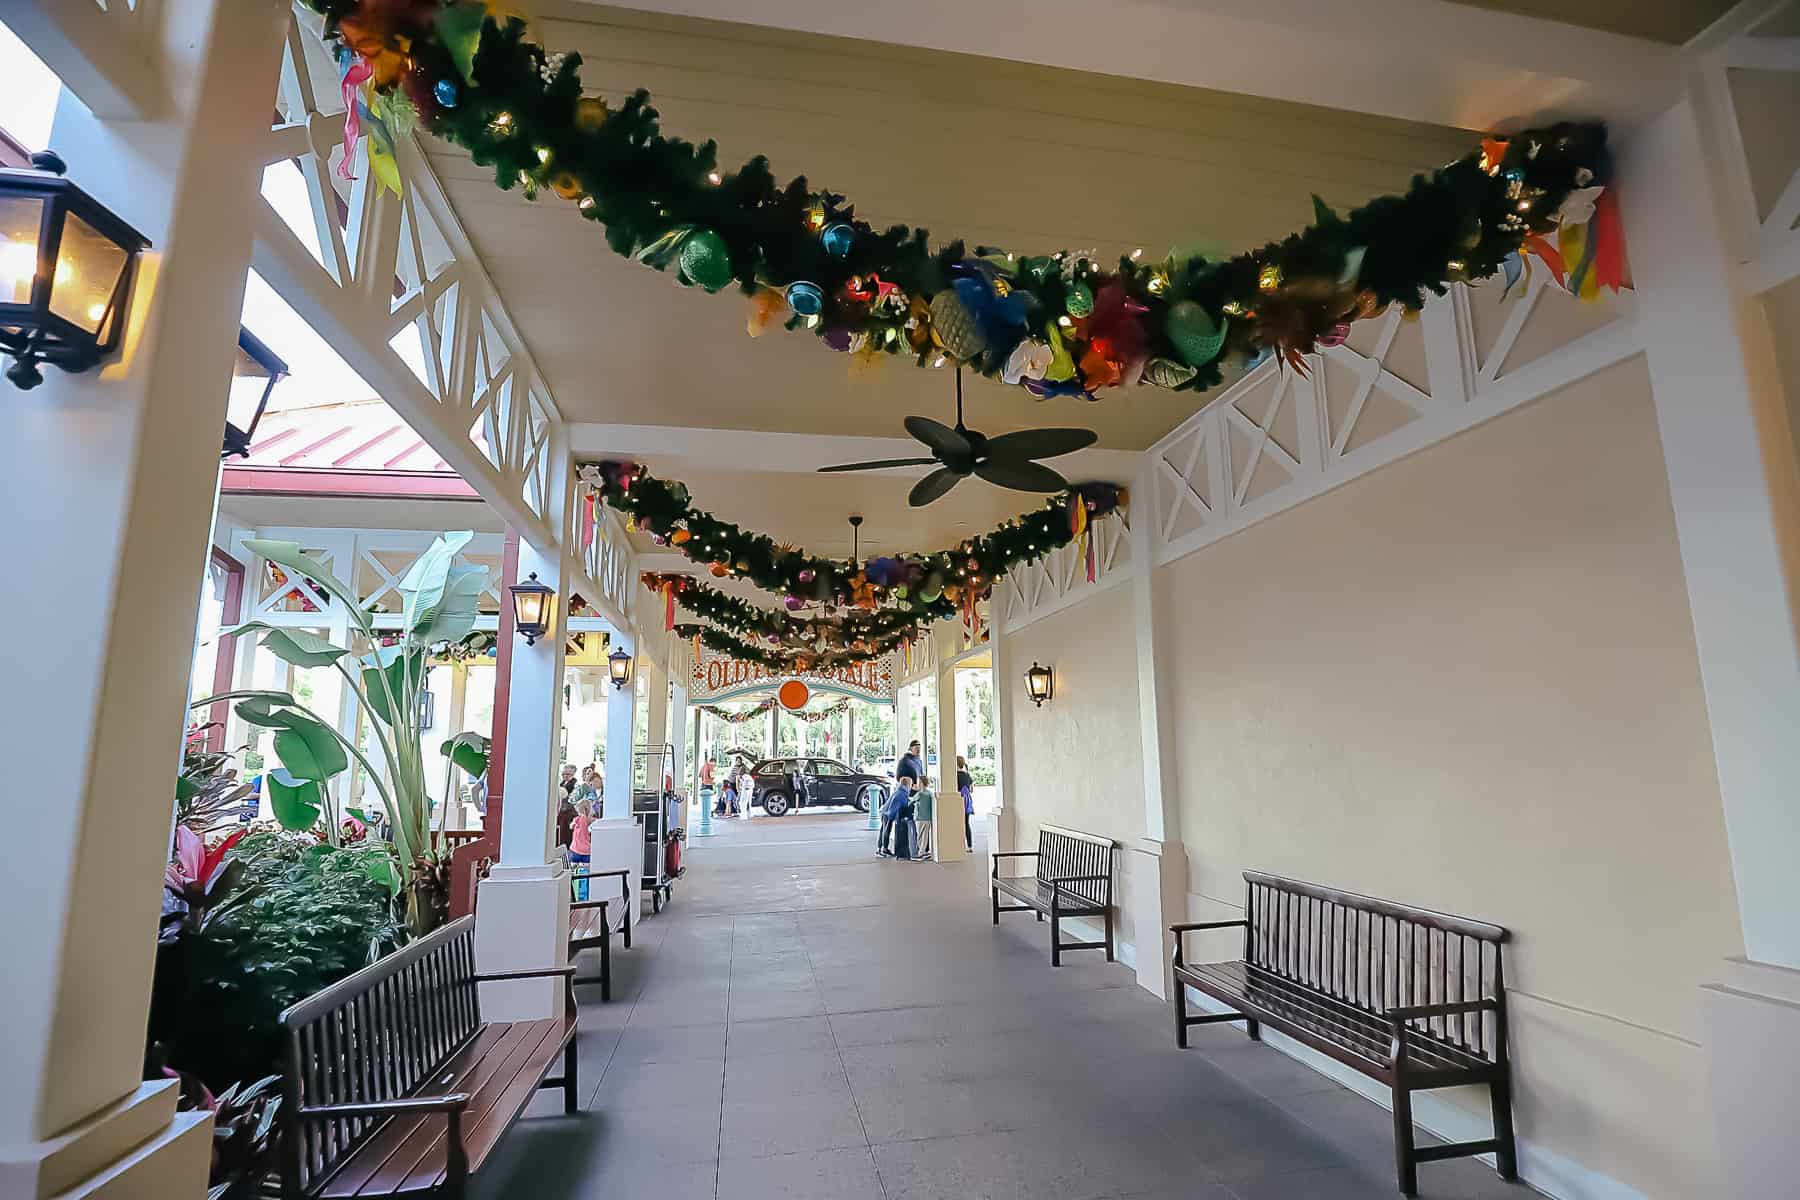 The Christmas garland swags every few feet near the entrance. 